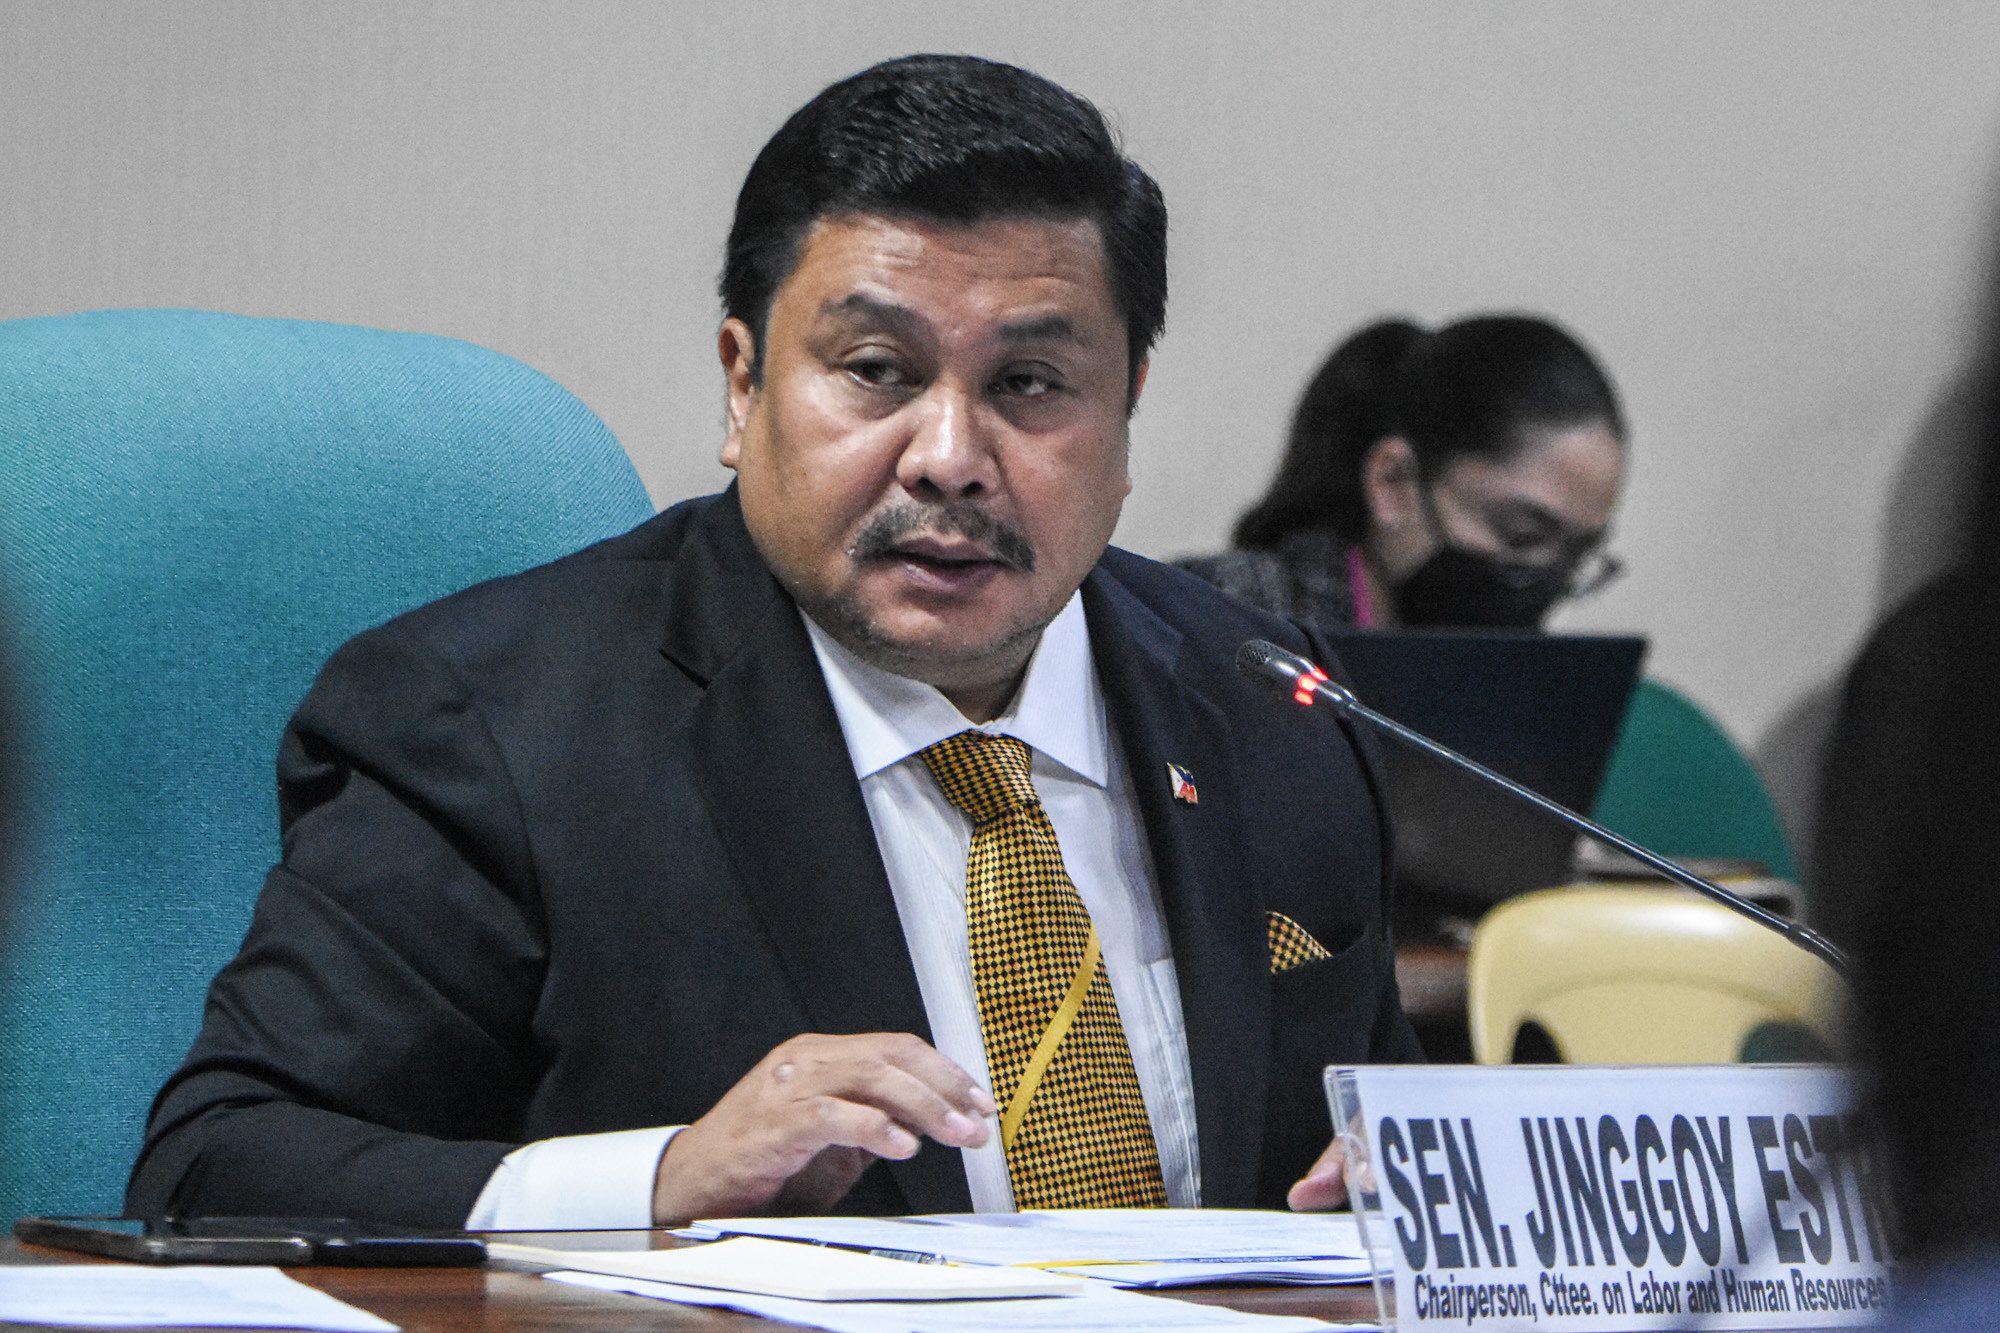 [WATCH] Estrada snaps at dismissed PDEA agent Morales for calling him ‘convicted’